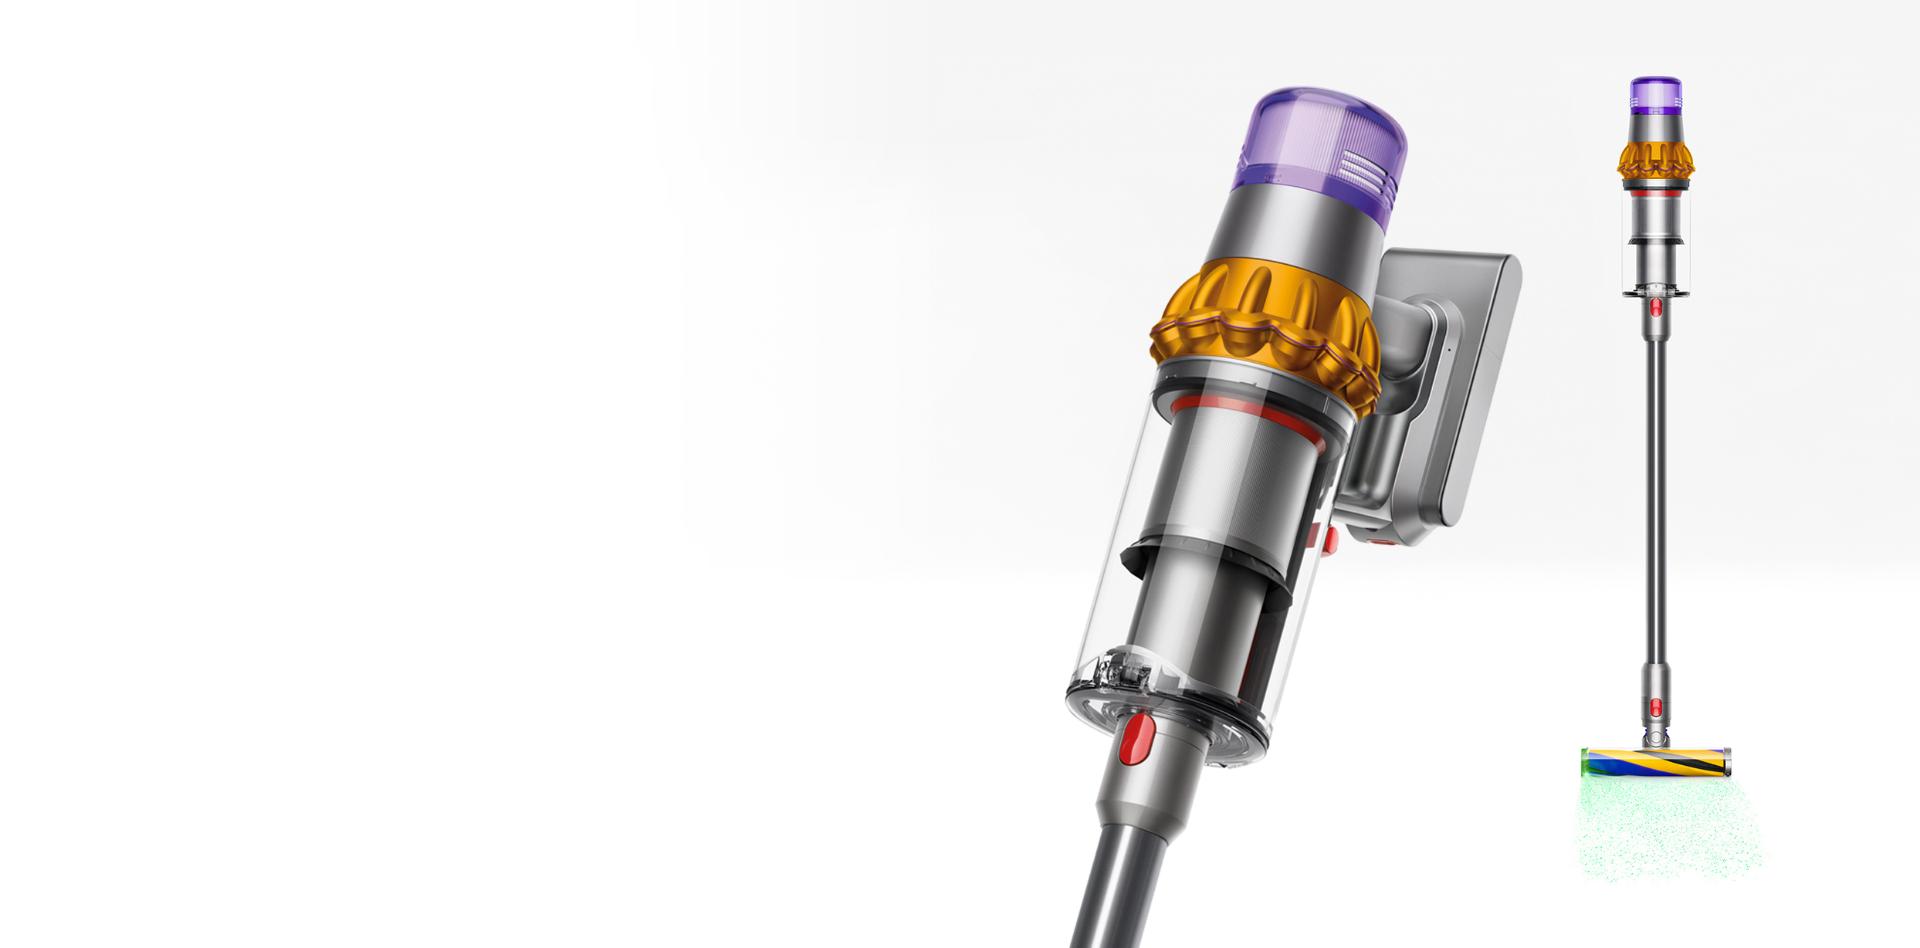 Dyson V15 Detect vacuum shown in both full view and close-up.